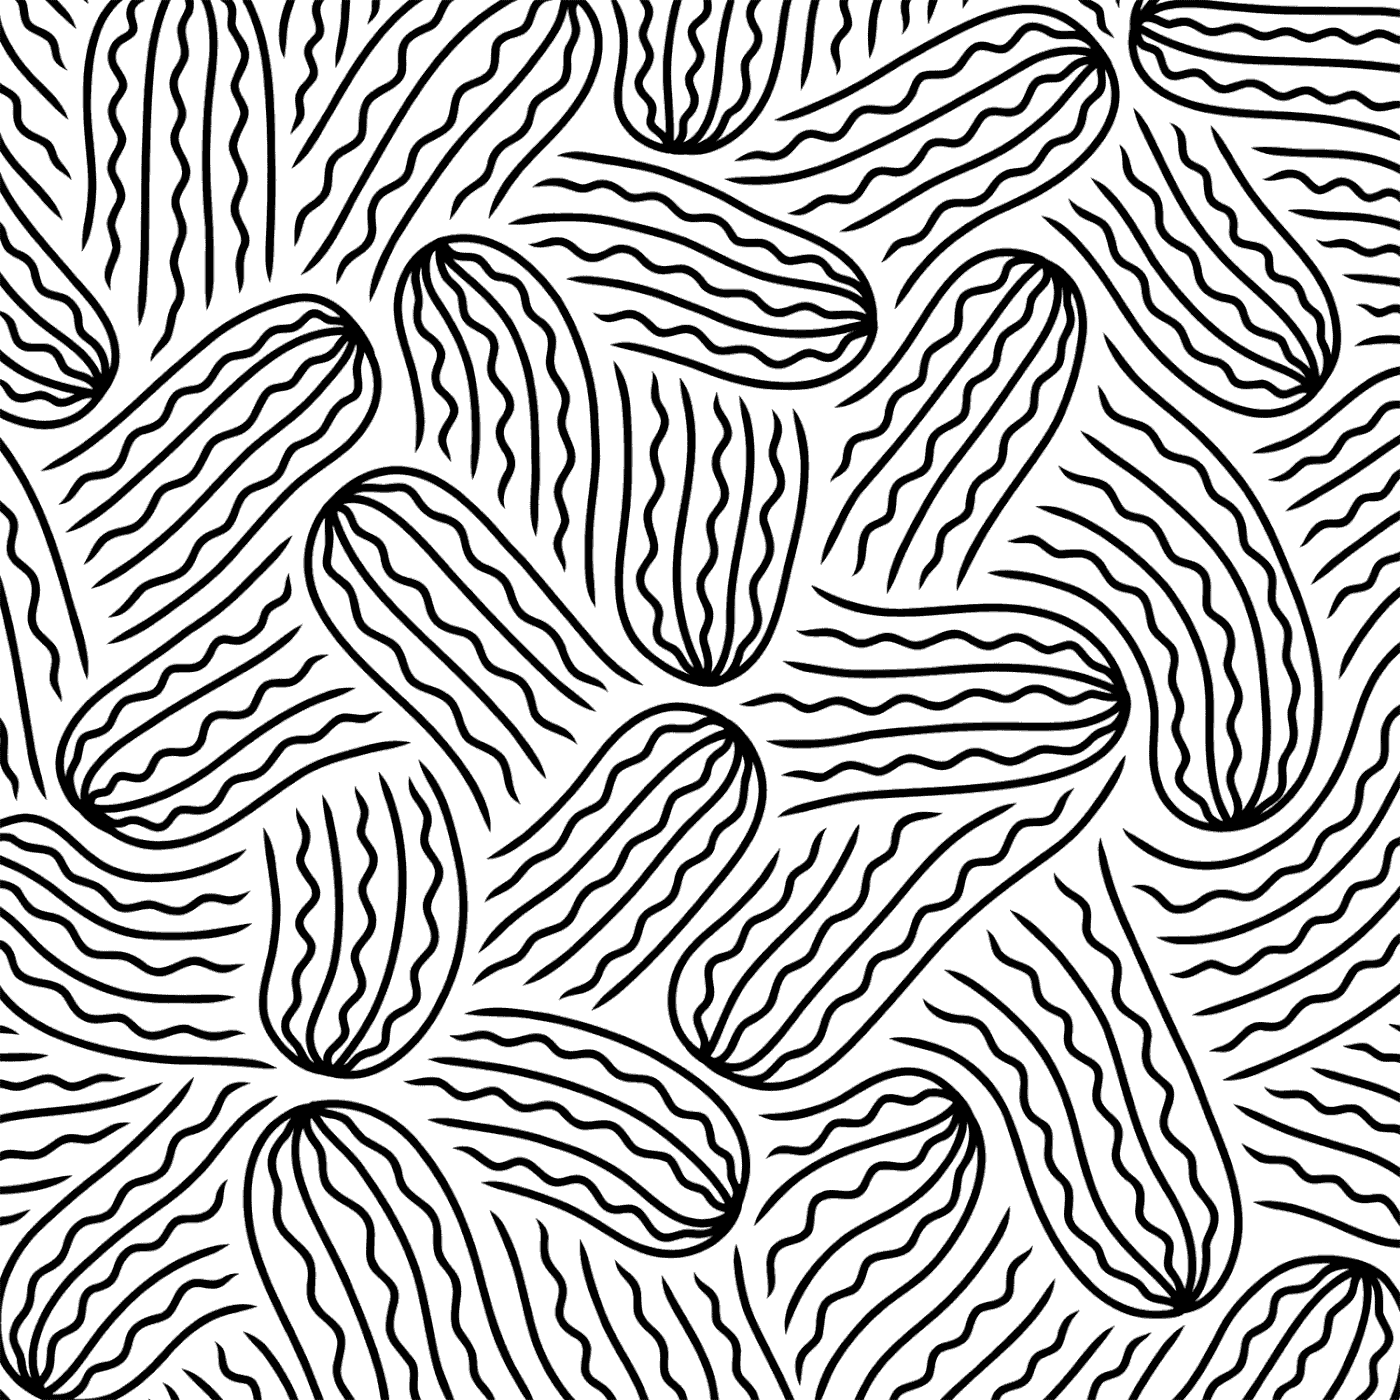 An animated black and white pattern depicting a sea of jellyfish.